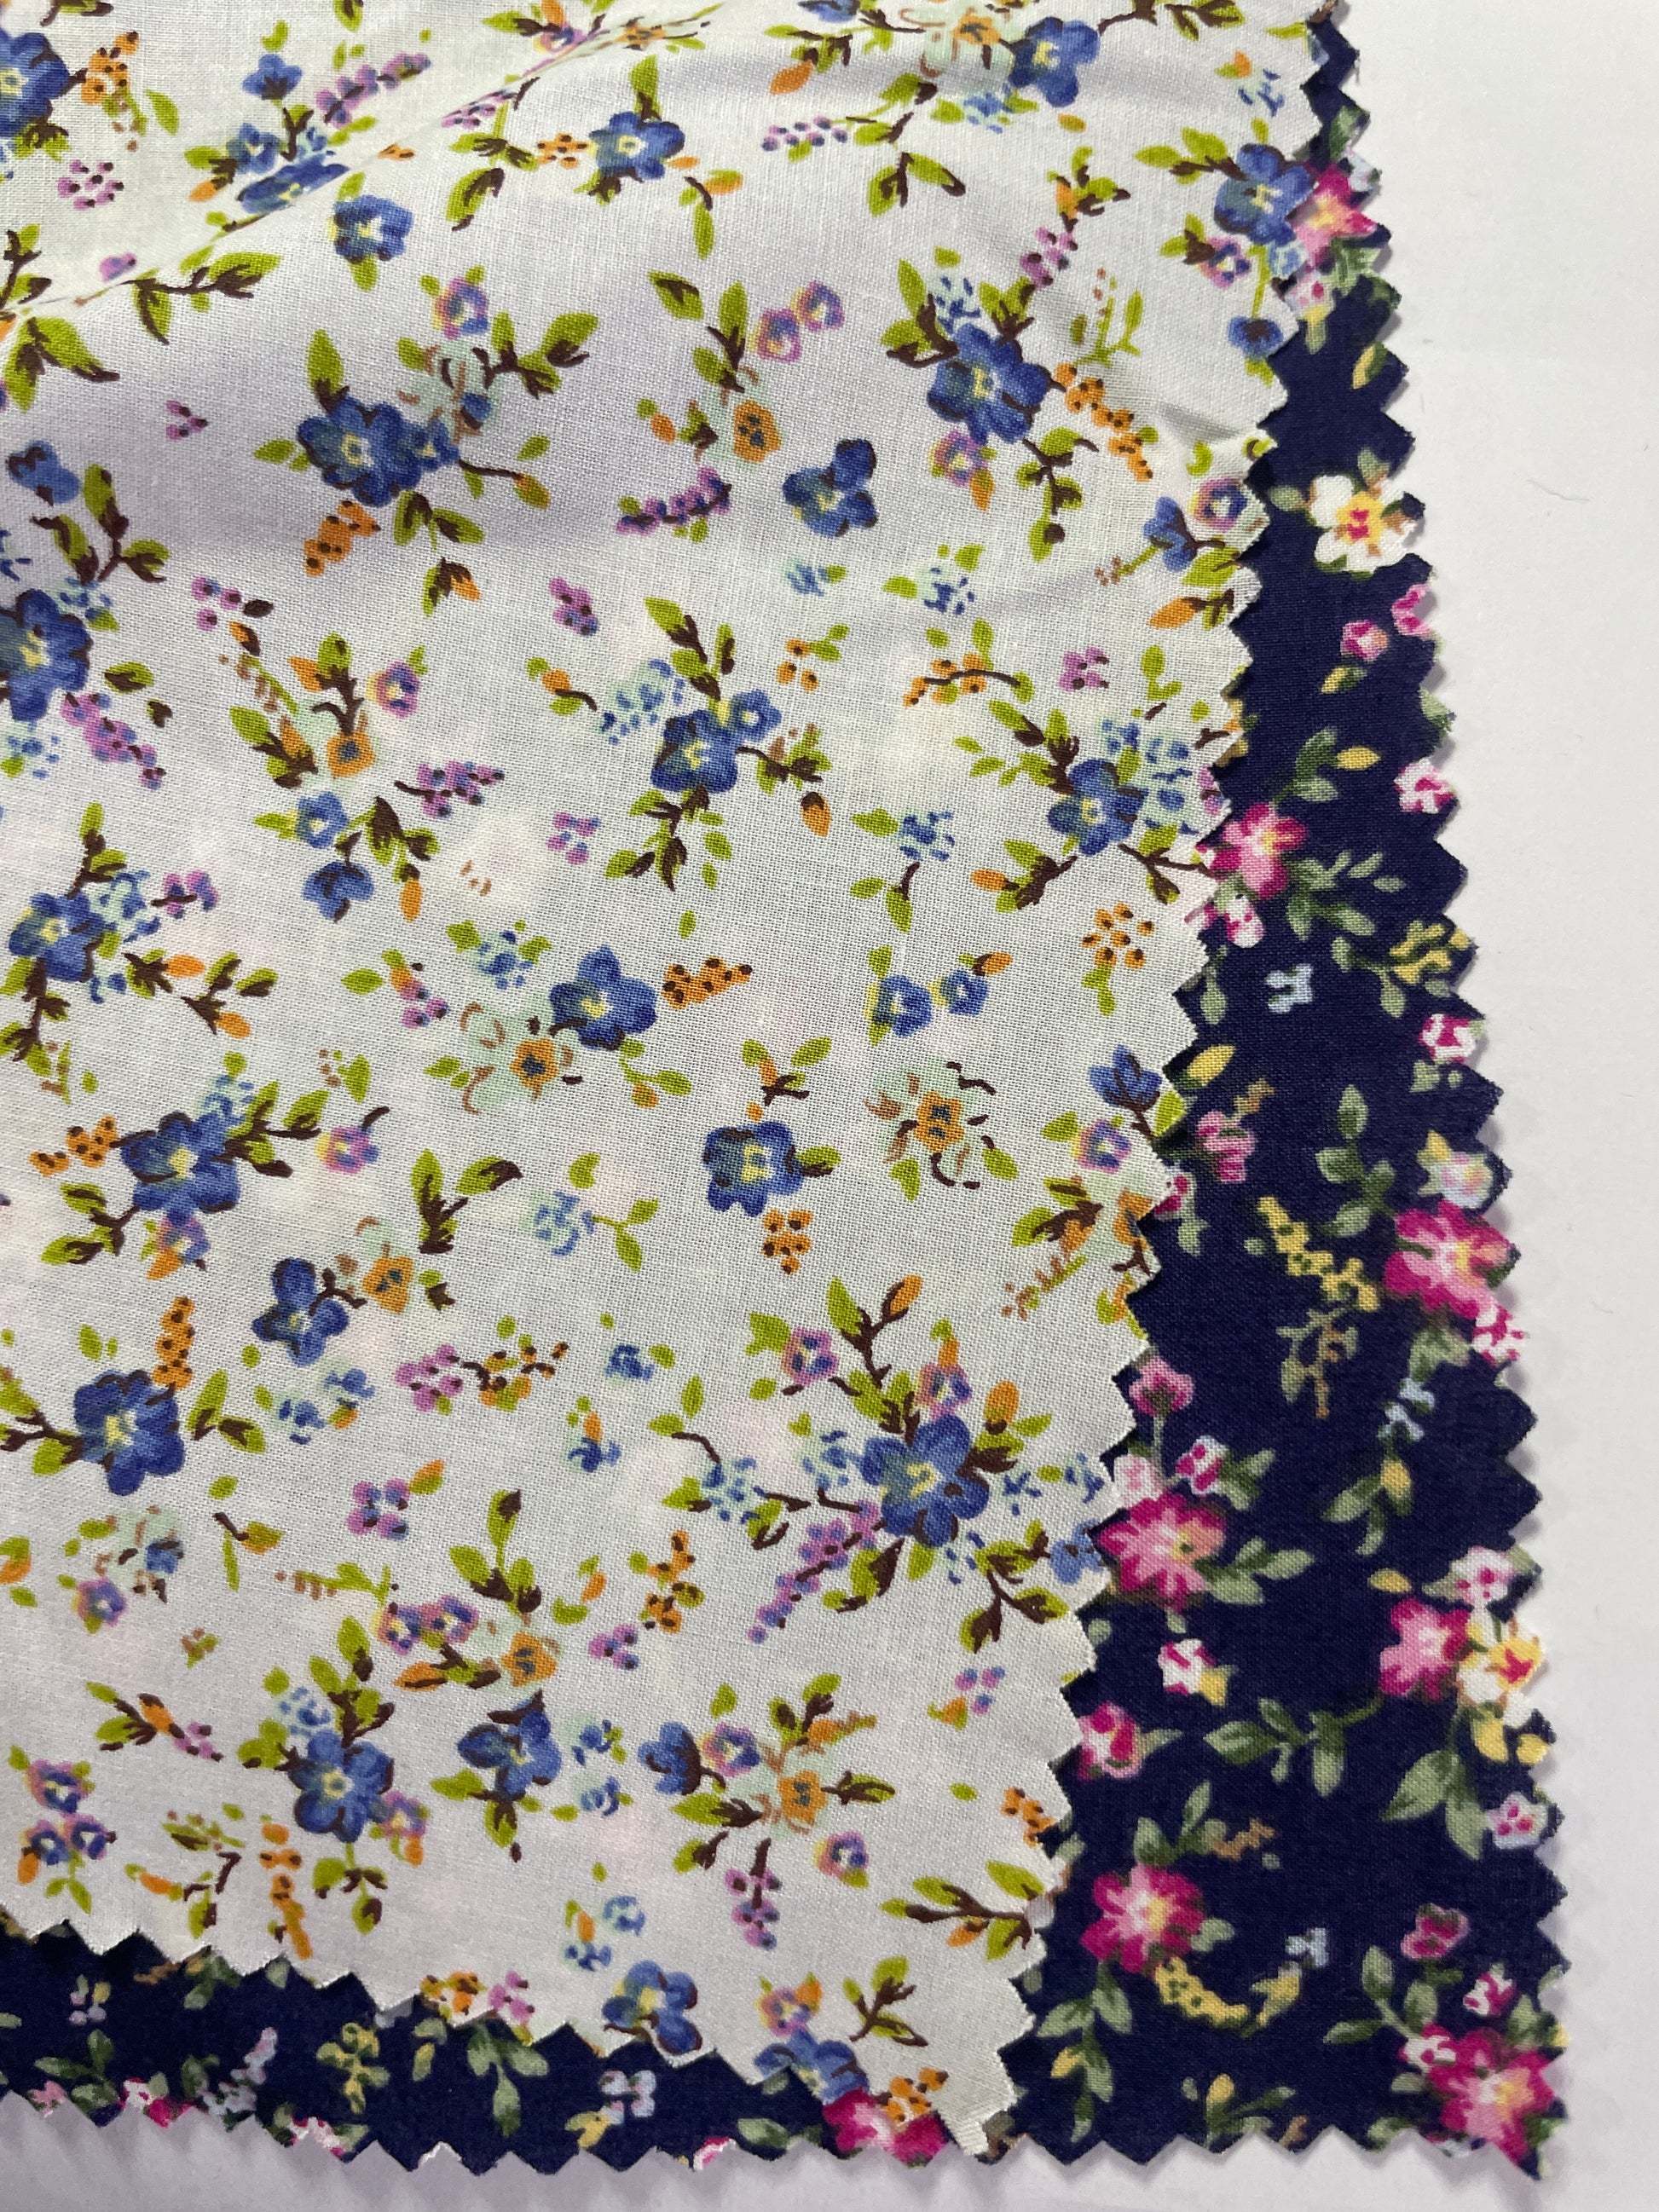 Printed Fabric Manufacturers, Printed Fabric Suppliers